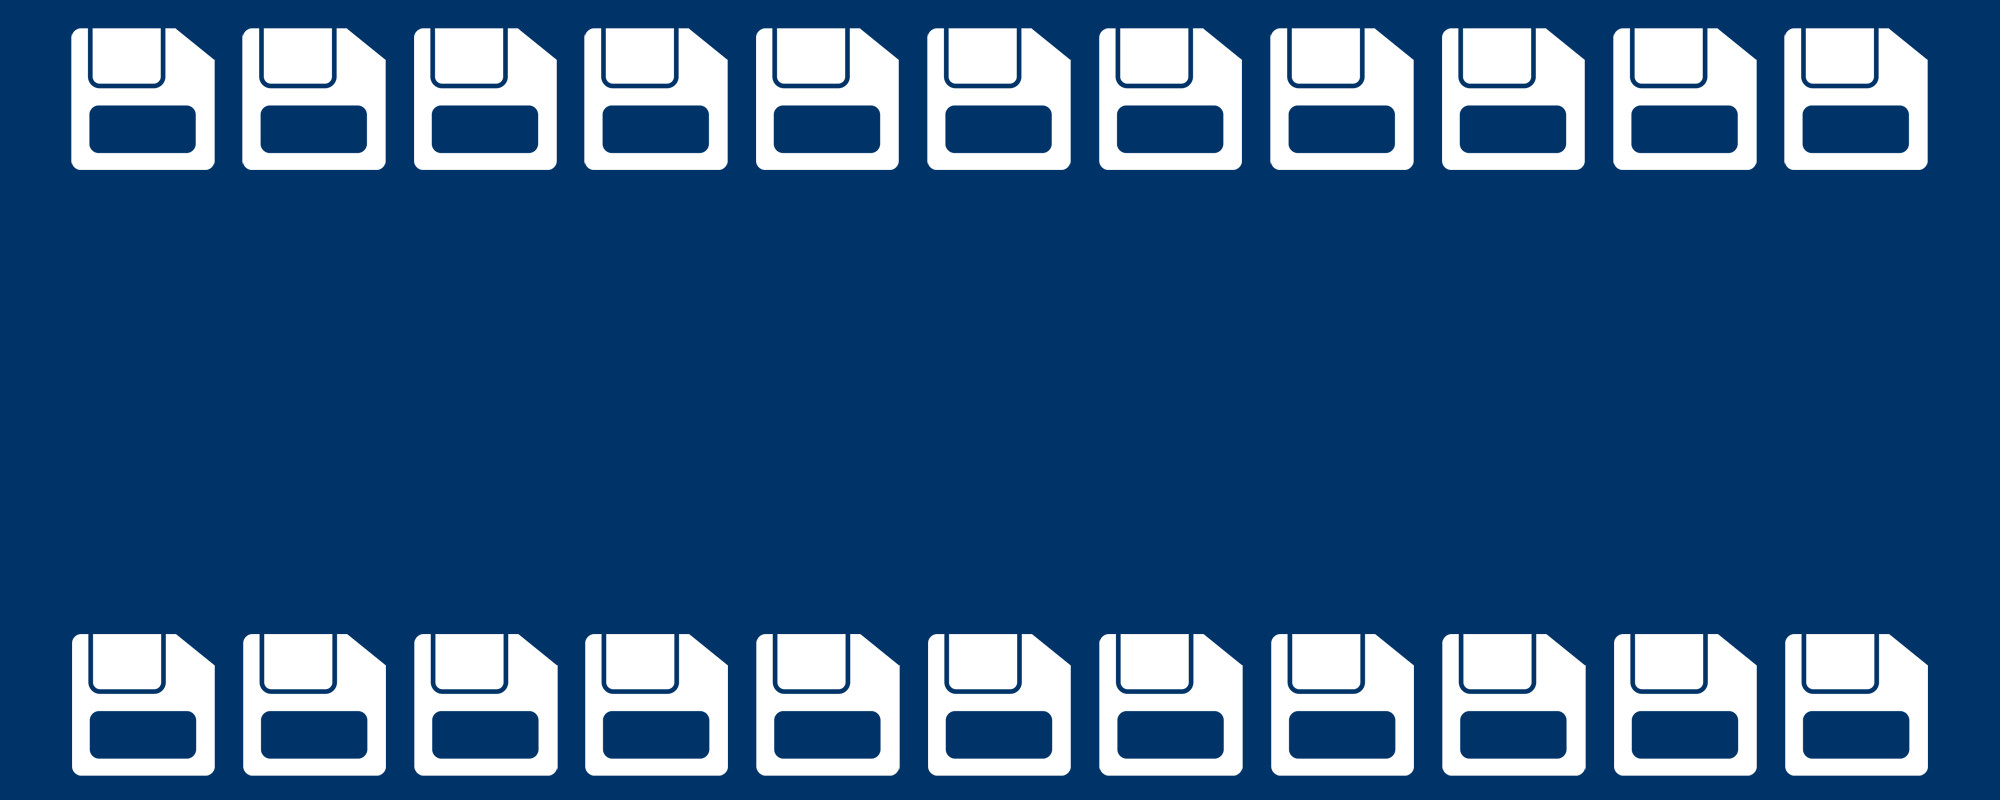 Illustration of floppy disks repeating in a line on the top and bottom of the image